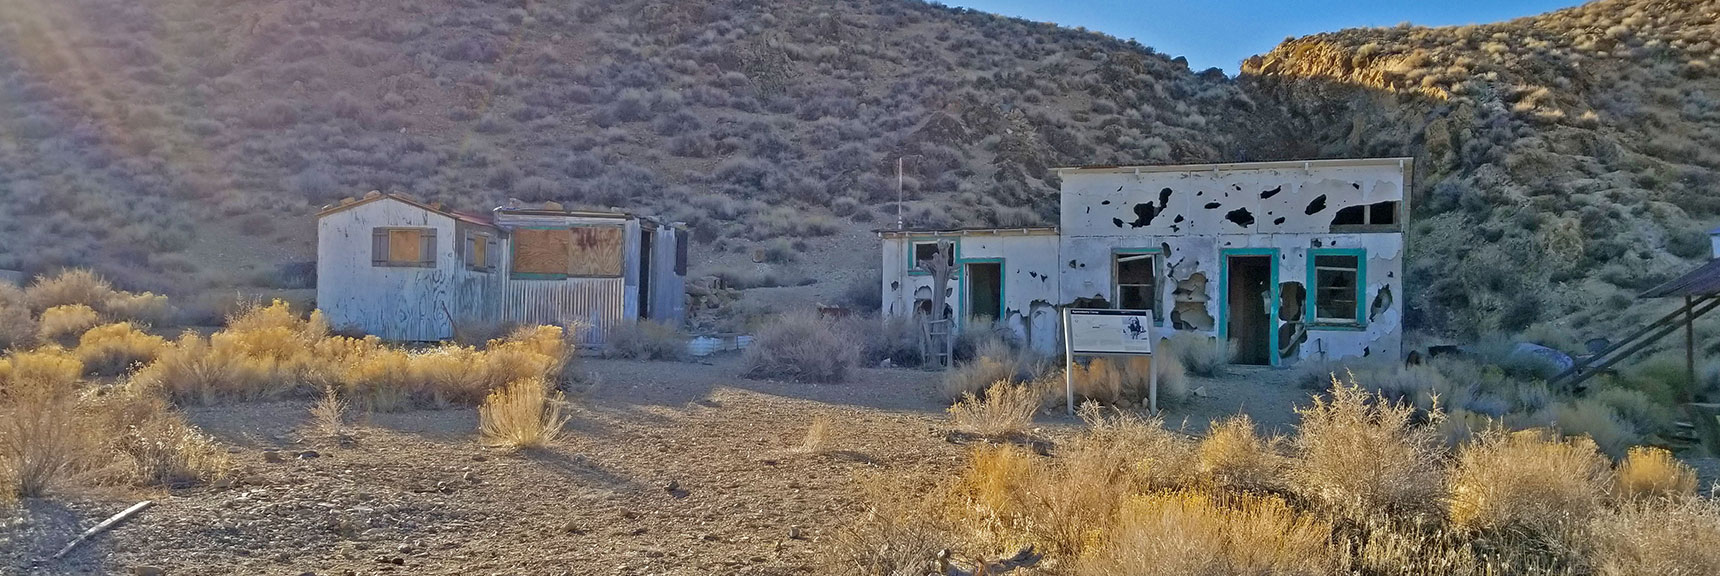 Pete Aguereberry's Guest House on the Right and Storage/Guest Cabin on the Left | Eureka Mine, Harrisburg, Cashier Mill, Death Valley, California